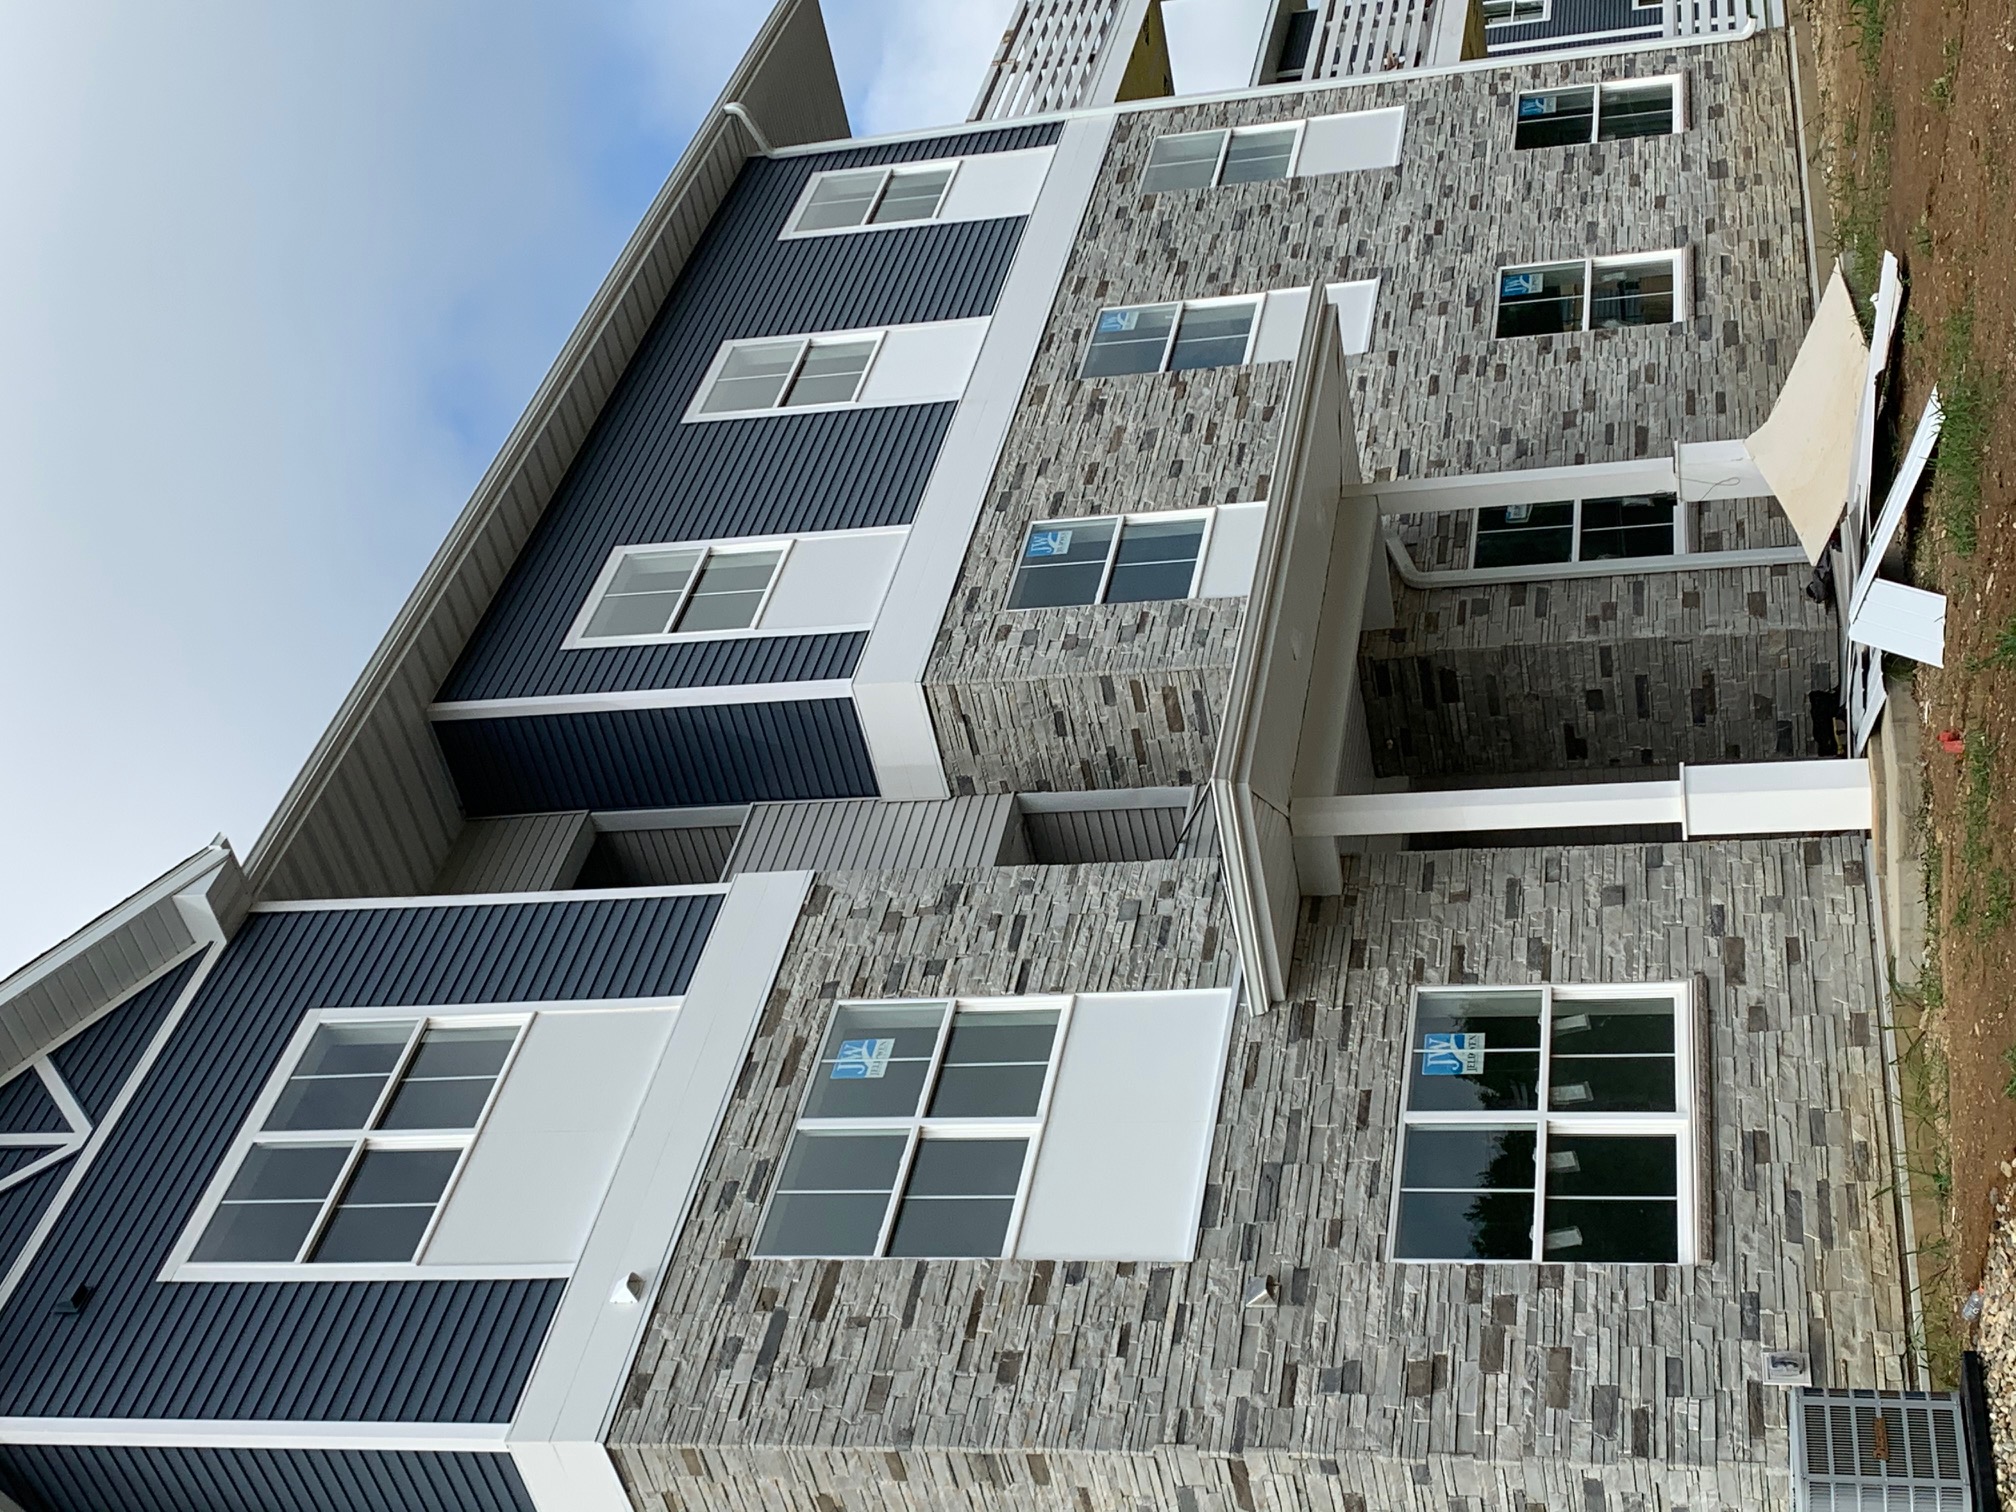 Versetta Stone siding and blue vinyl siding to lend a single-family feel that elevates this garden-style apartment complex